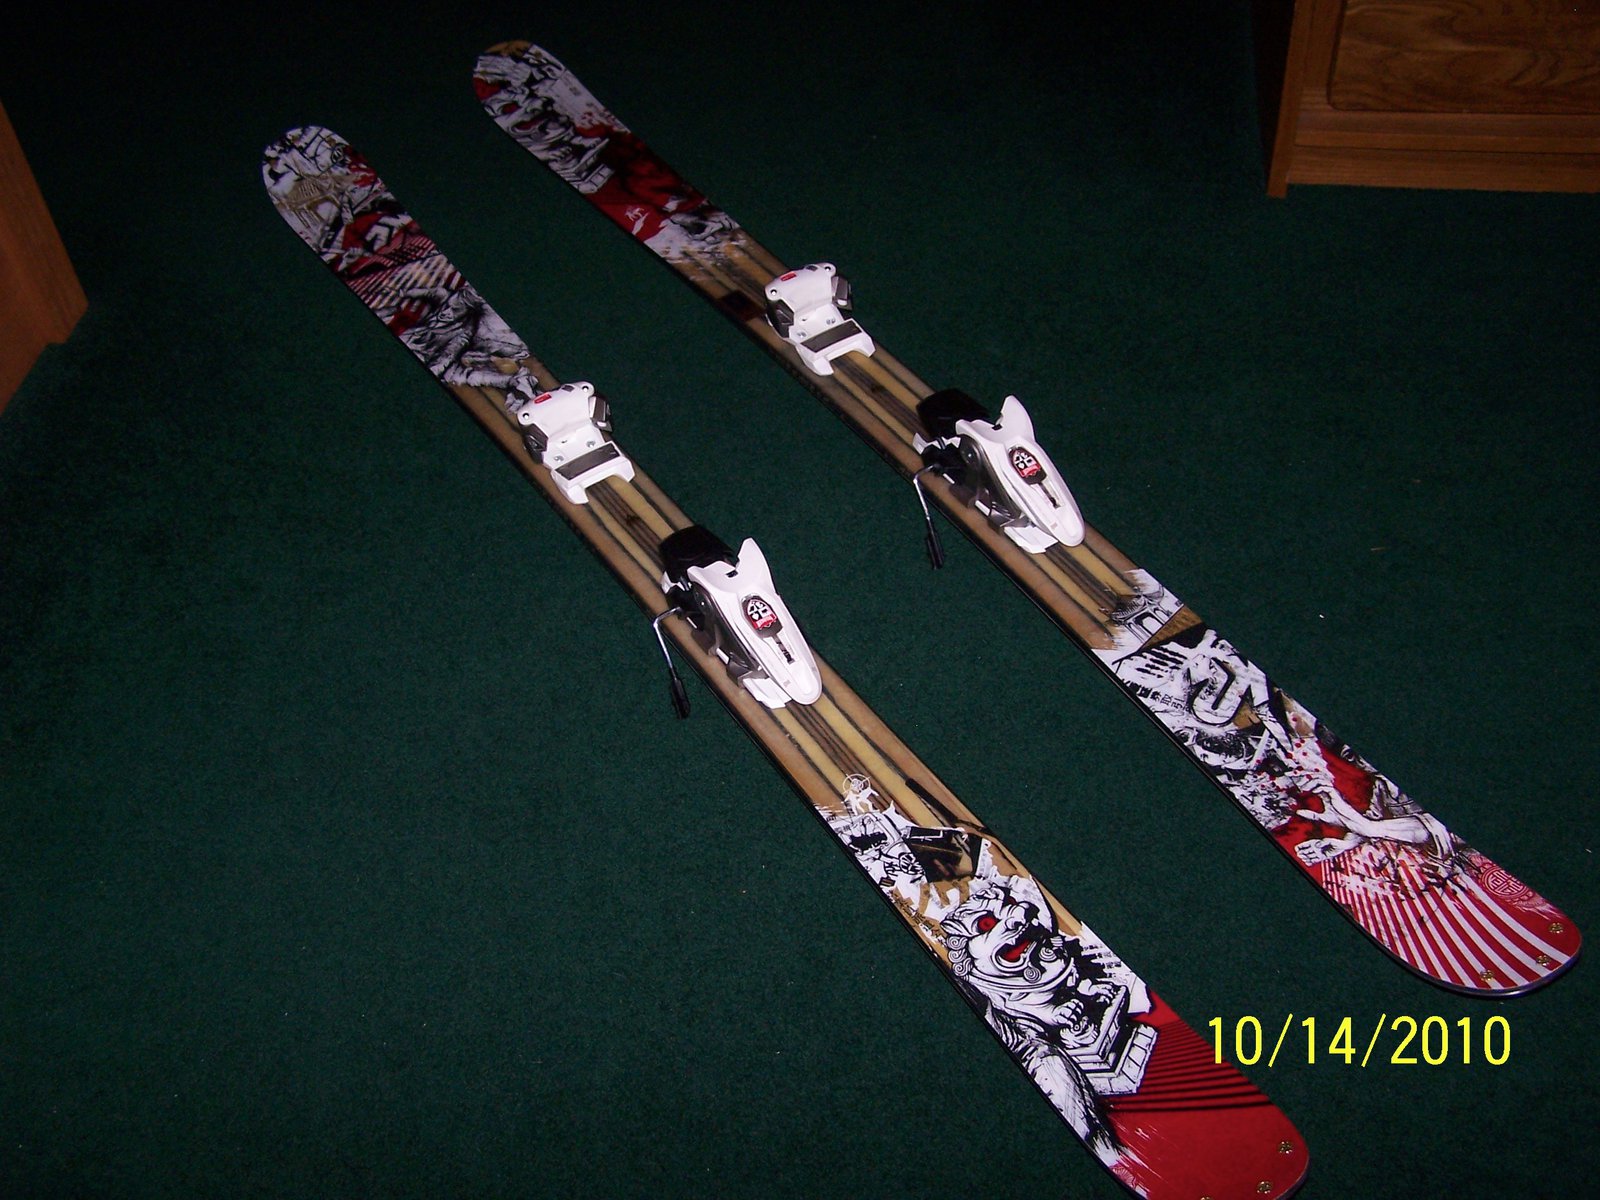 New Skis n Boots - 2 of 3